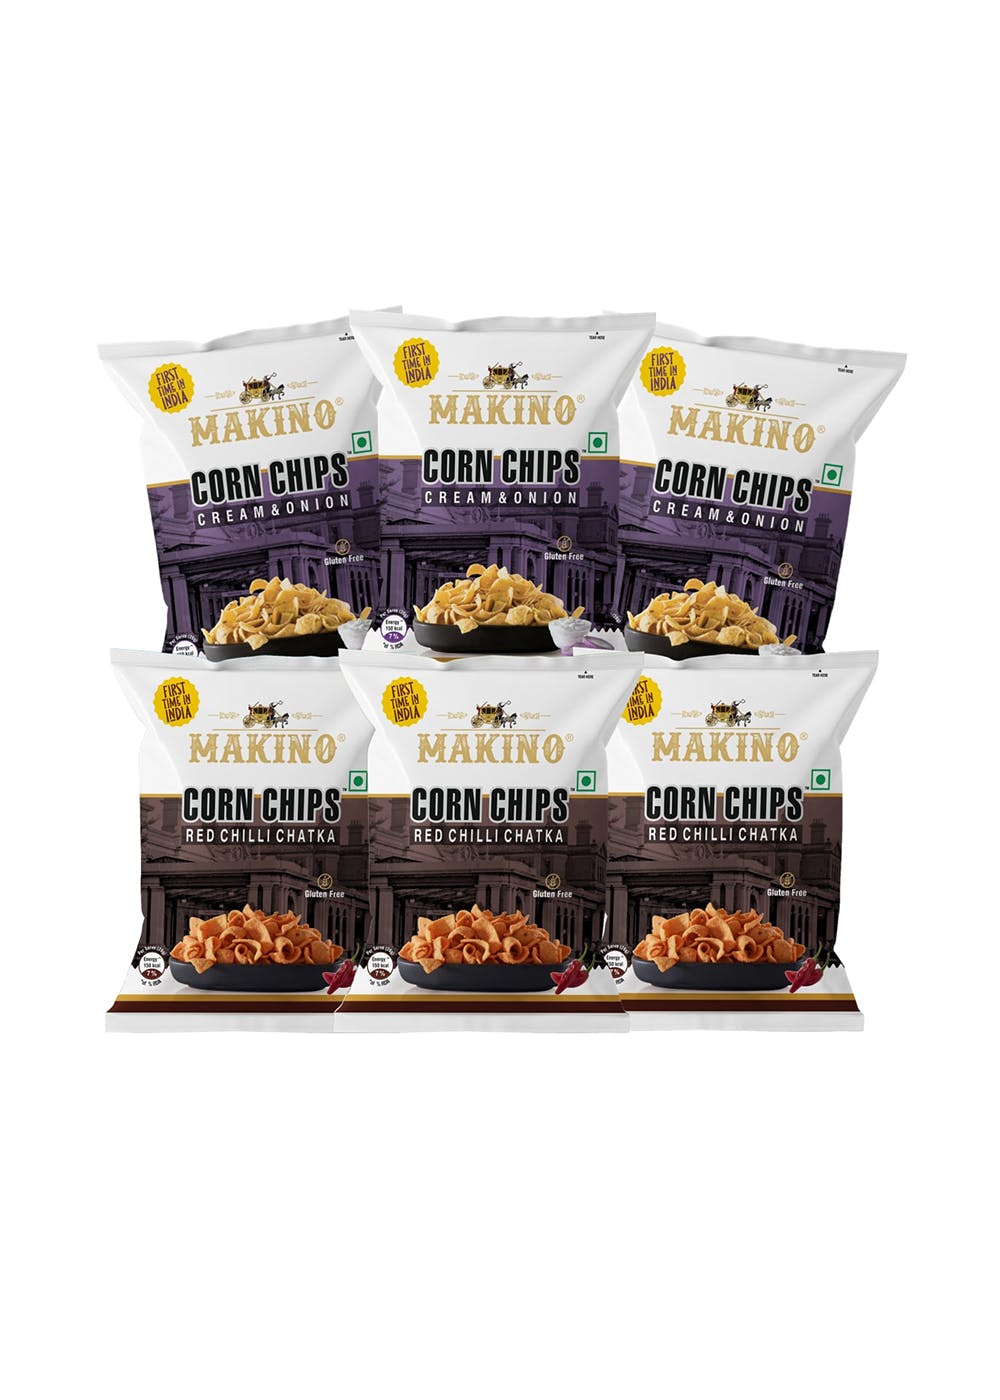 Corn Chips Cream & Onion, Red Chilli Chatka - Pack of 6 - 60gms each